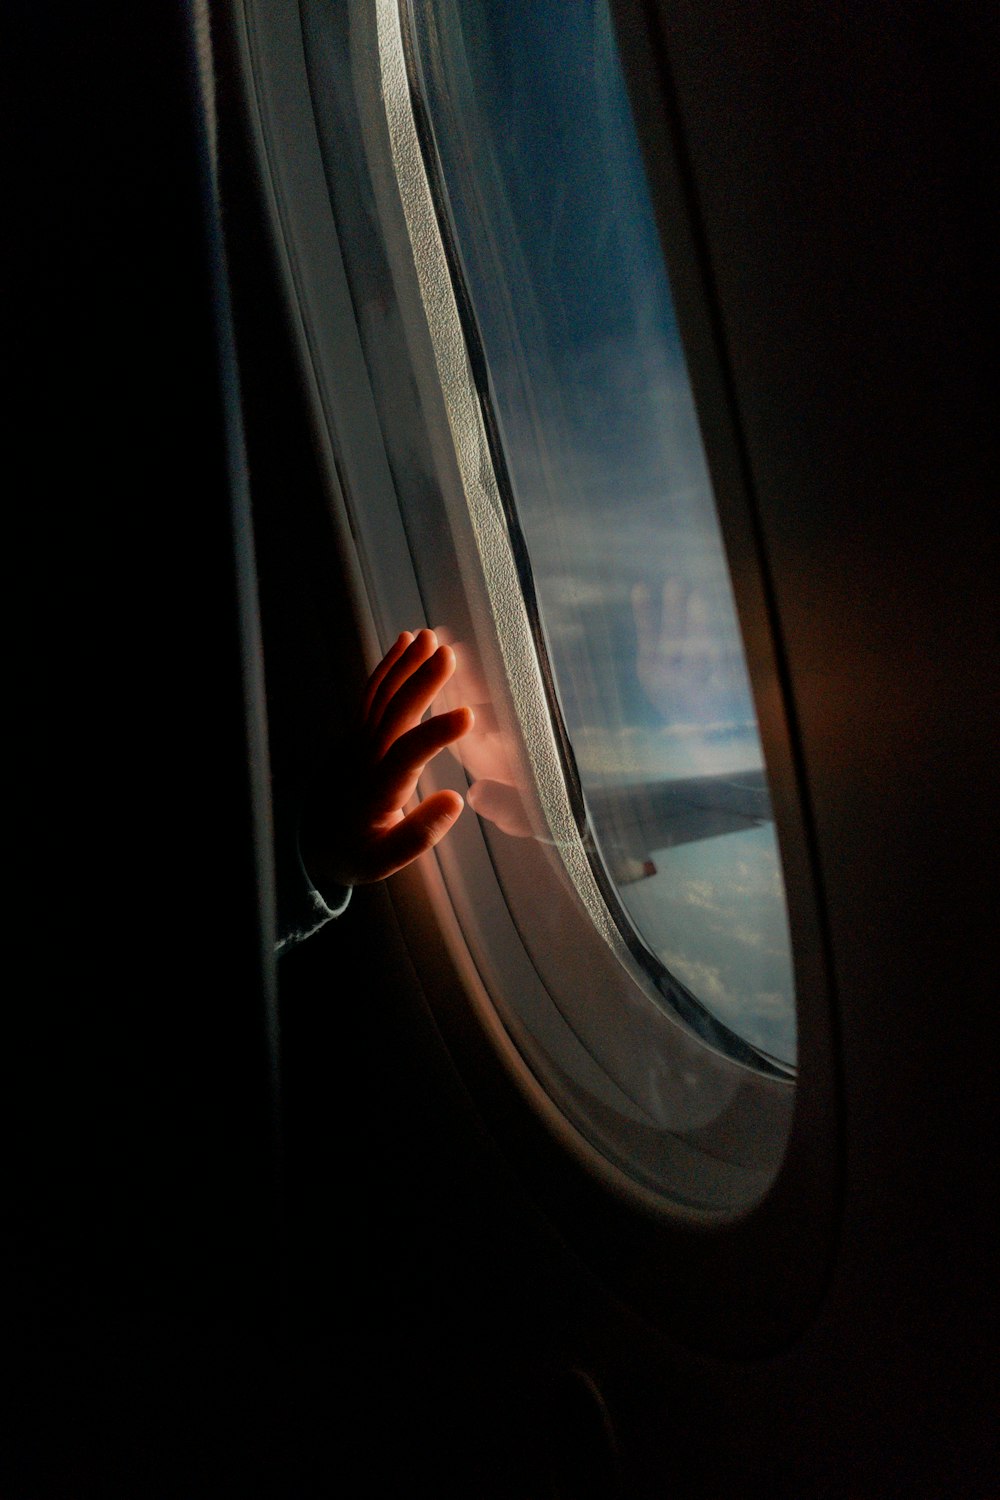 a person's hand on the window of an airplane